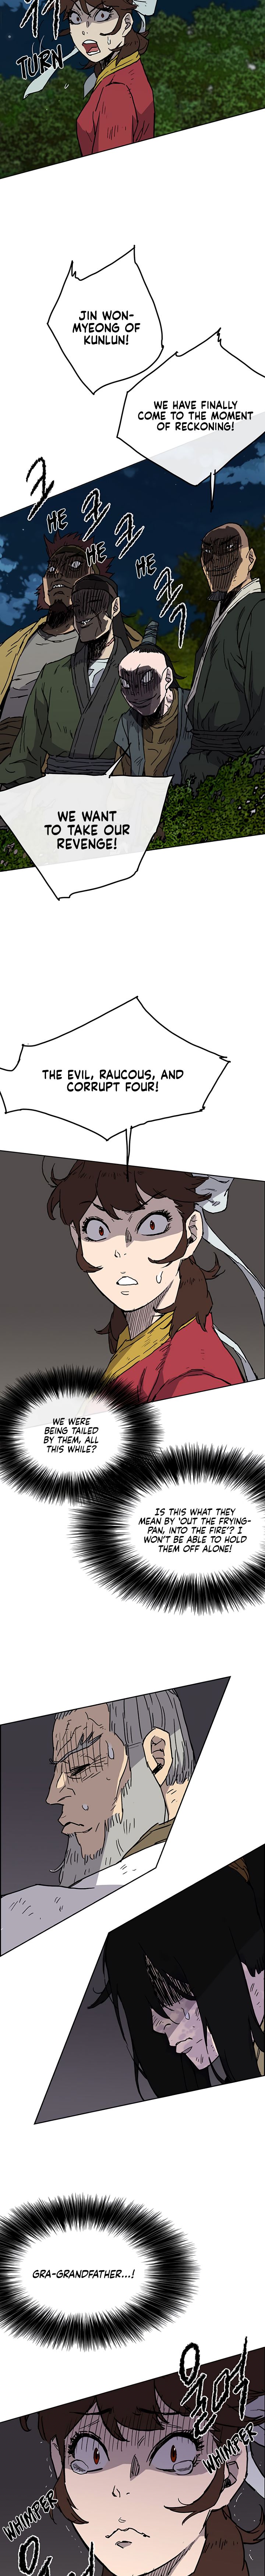 The Undefeatable Swordsman - Chapter 5 Page 22